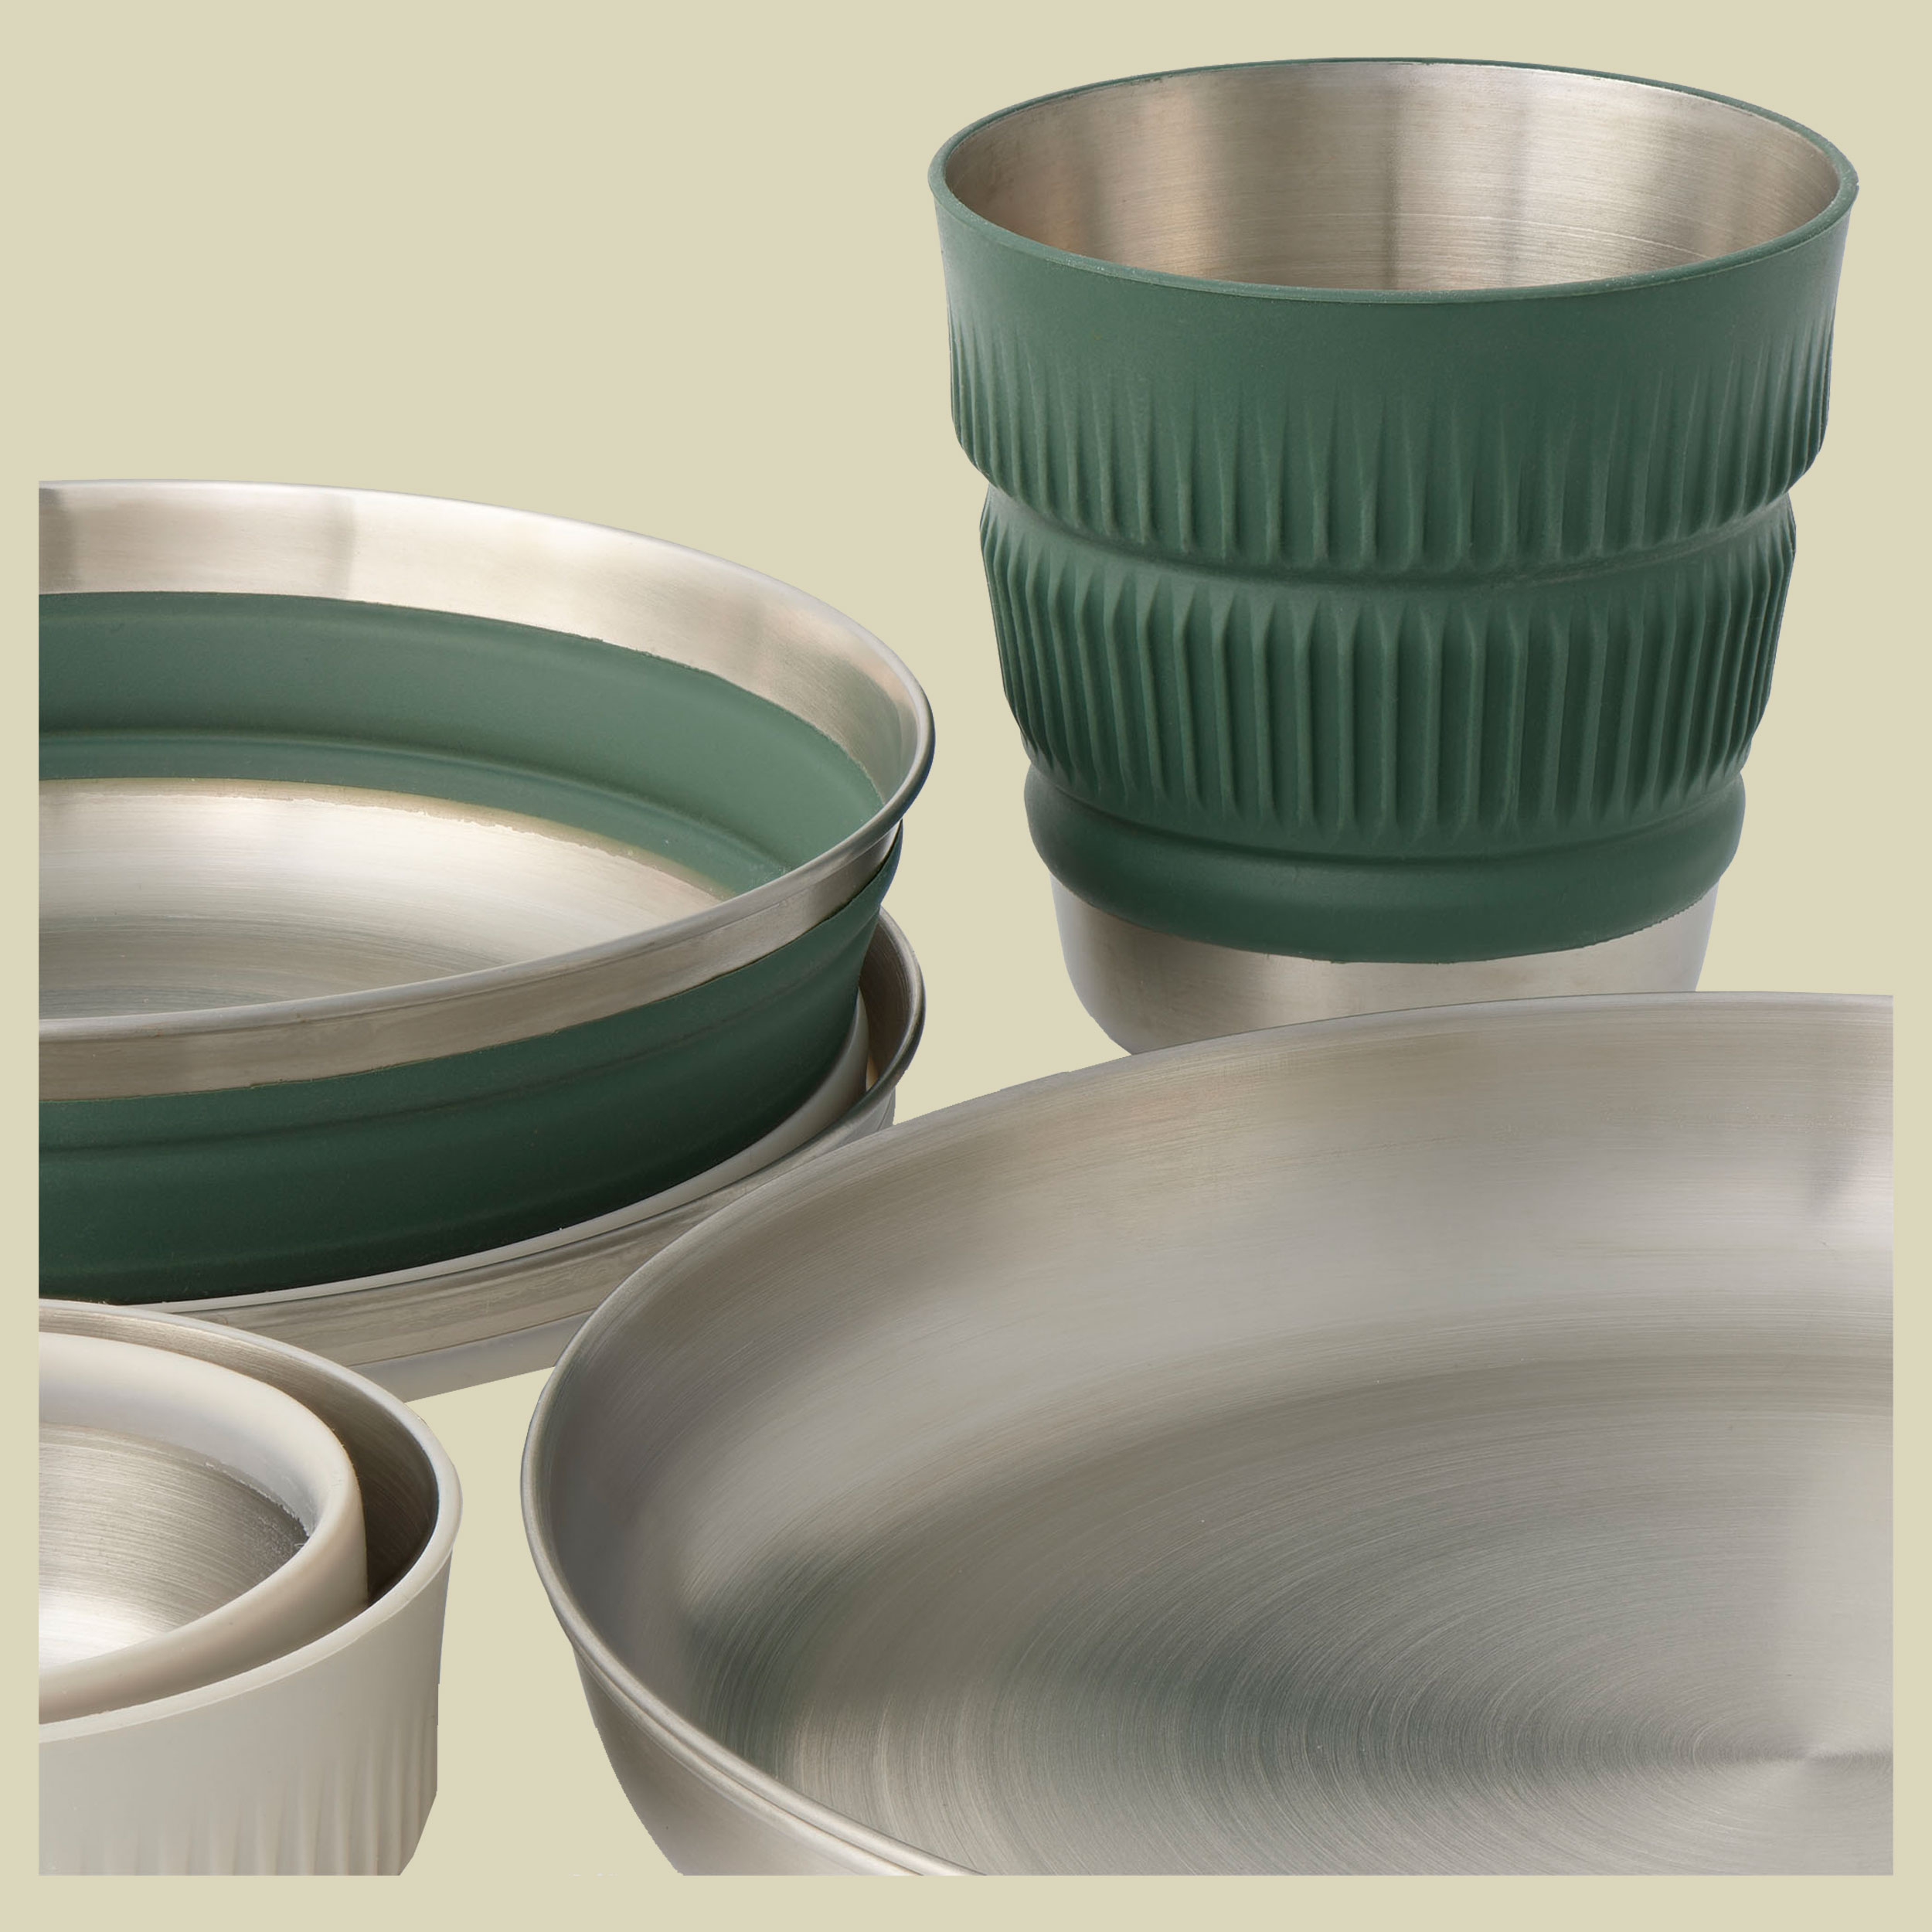 Detour Stainless Steel Collapsible Dinnerware Set - 2P 6 piece